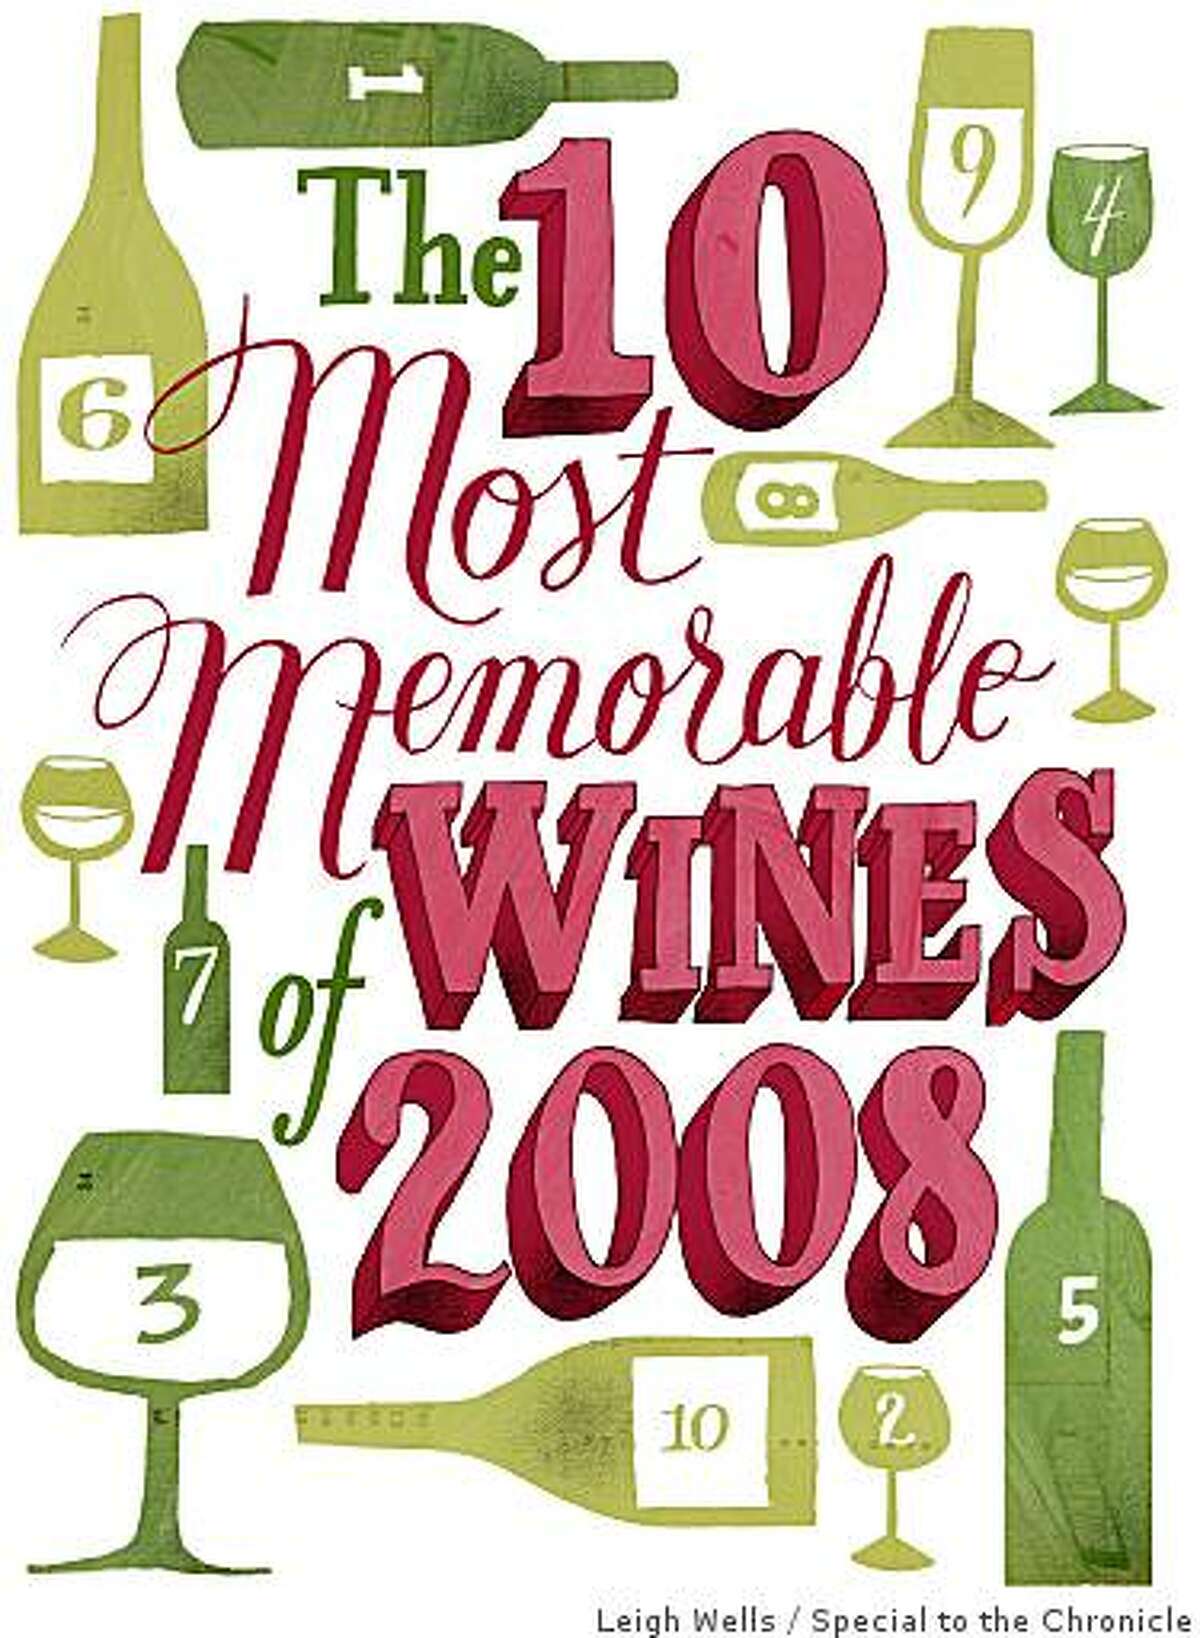 Illustration for "The 10 Most Memorable Wines of 2008" by Leigh Wells.